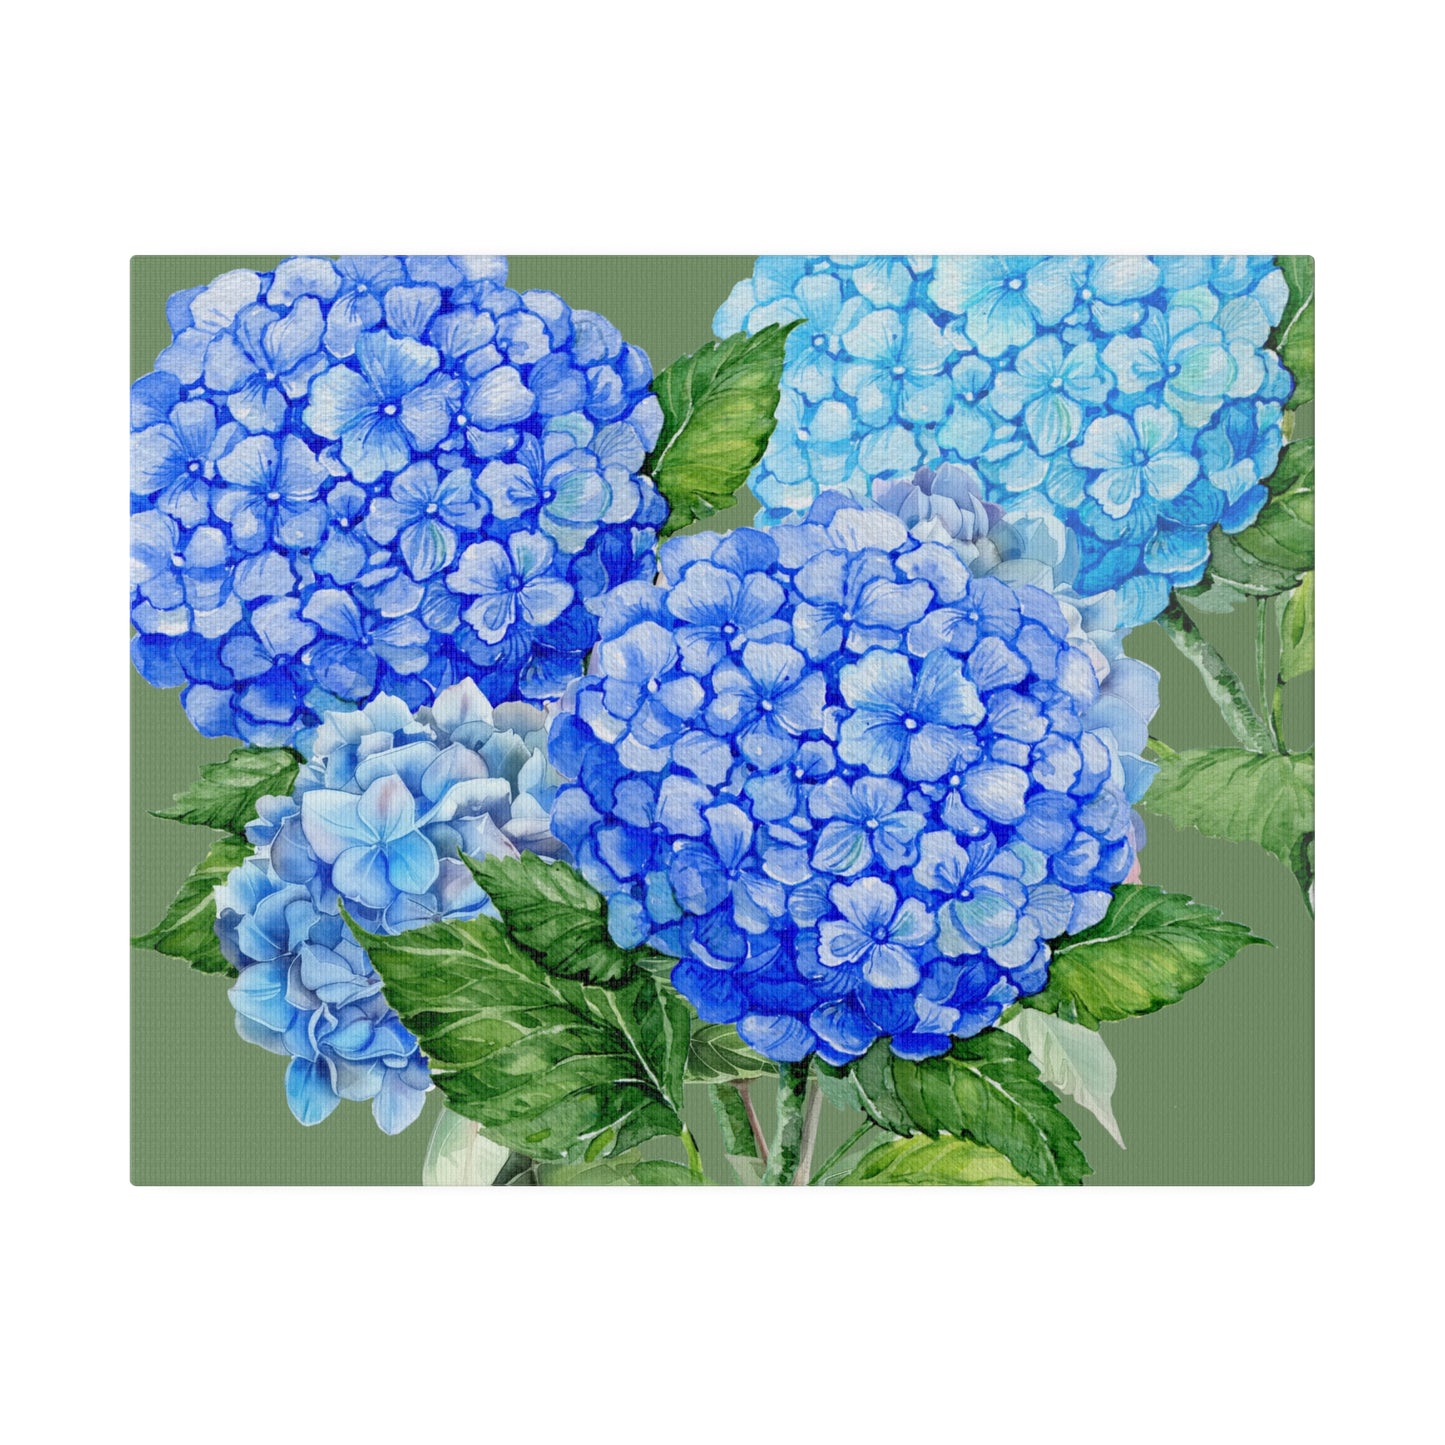 Botanical Wall Art, Blue Flowers Canvas Wall Art, Stretched, 0.75"